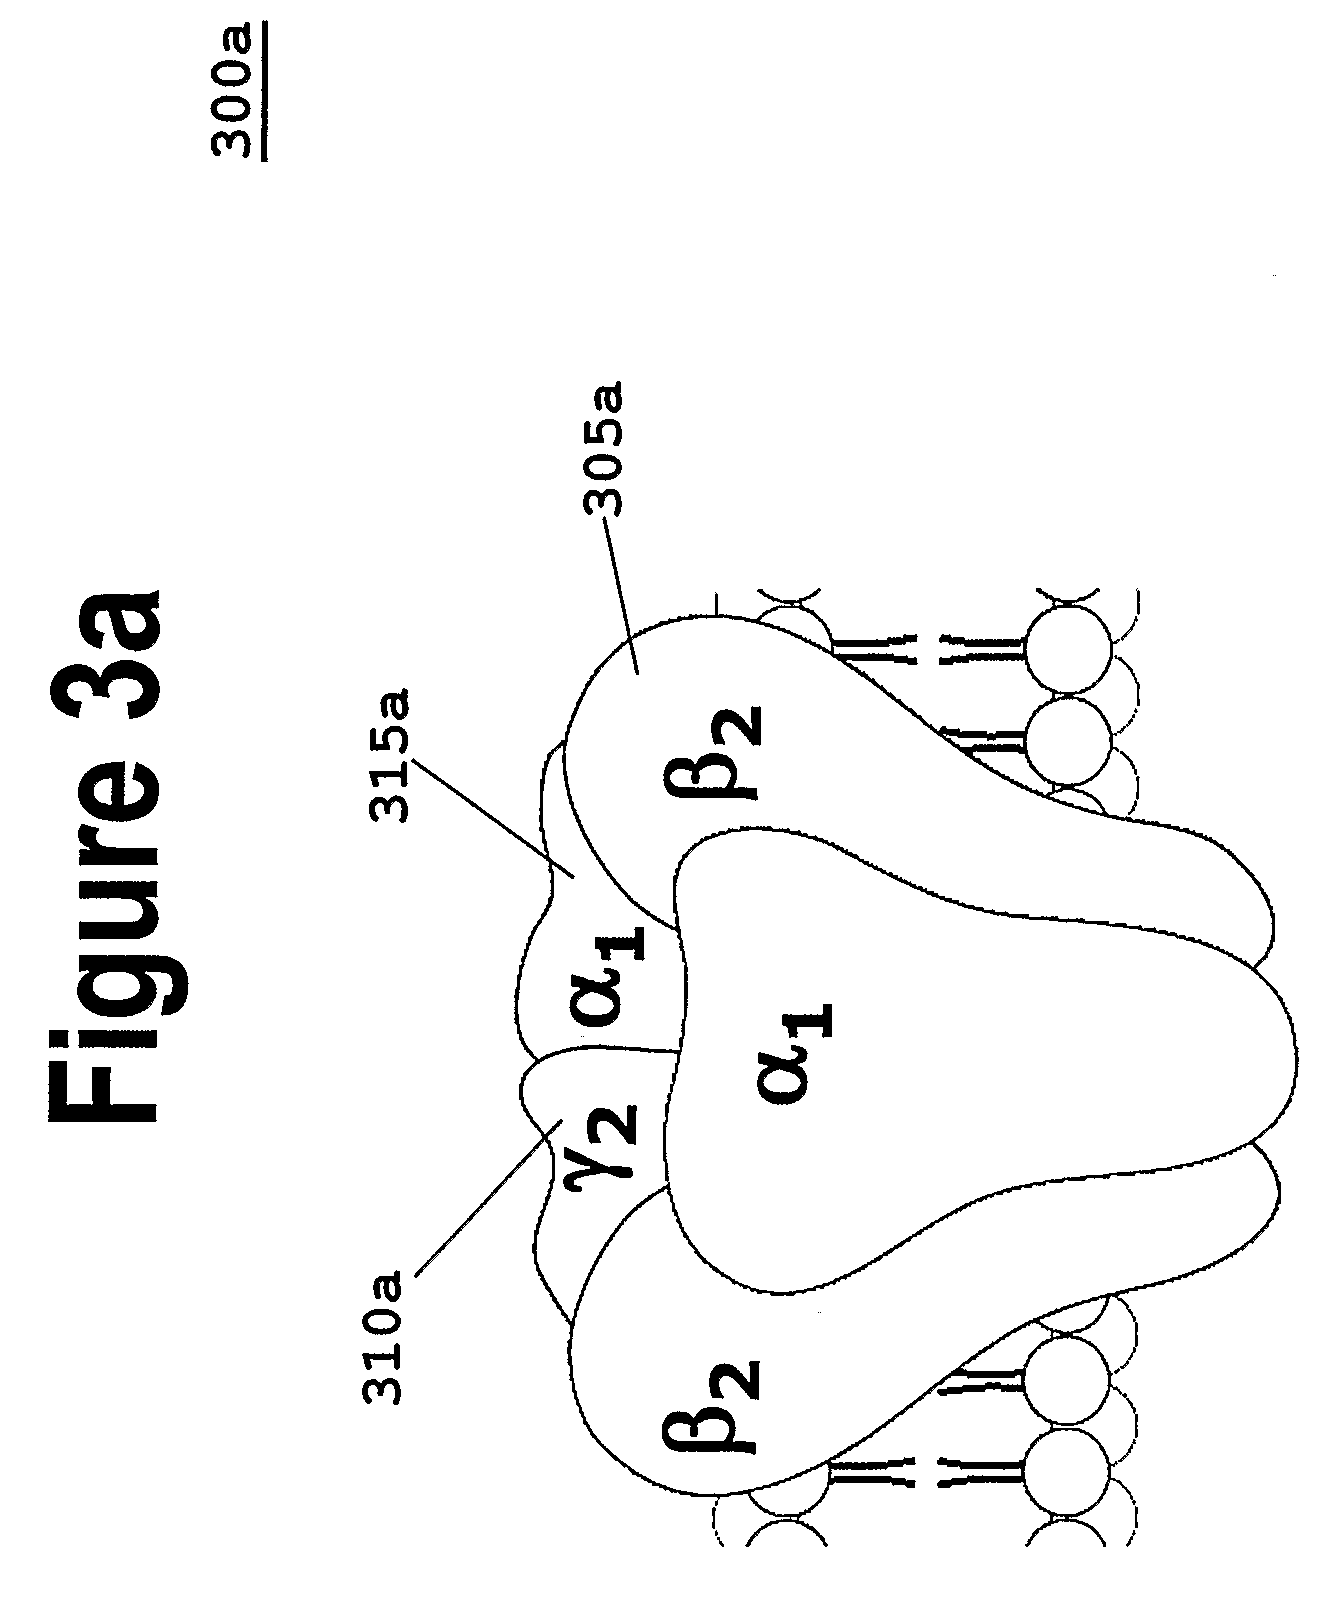 Methods of and Compositions For the Prevention of Anxiety, Substance Abuse, and Dependence